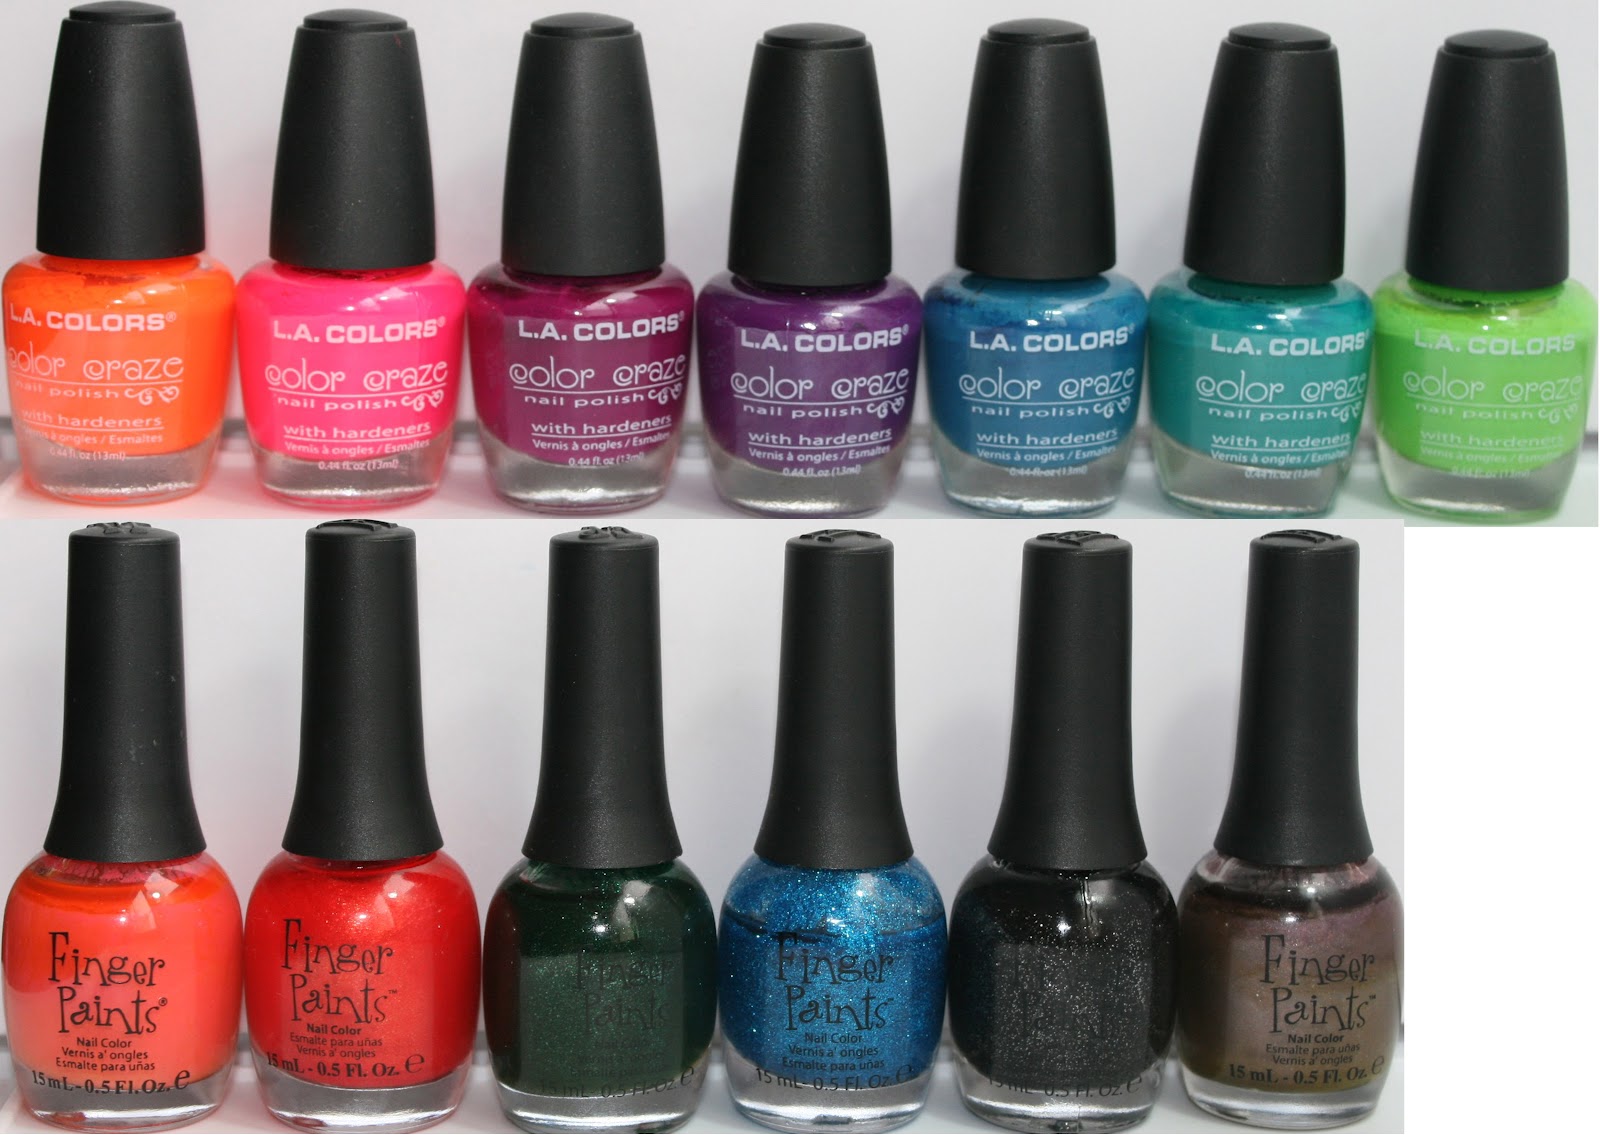 L.A. Colors Holographic Shimmer Nail Polish - wide 9